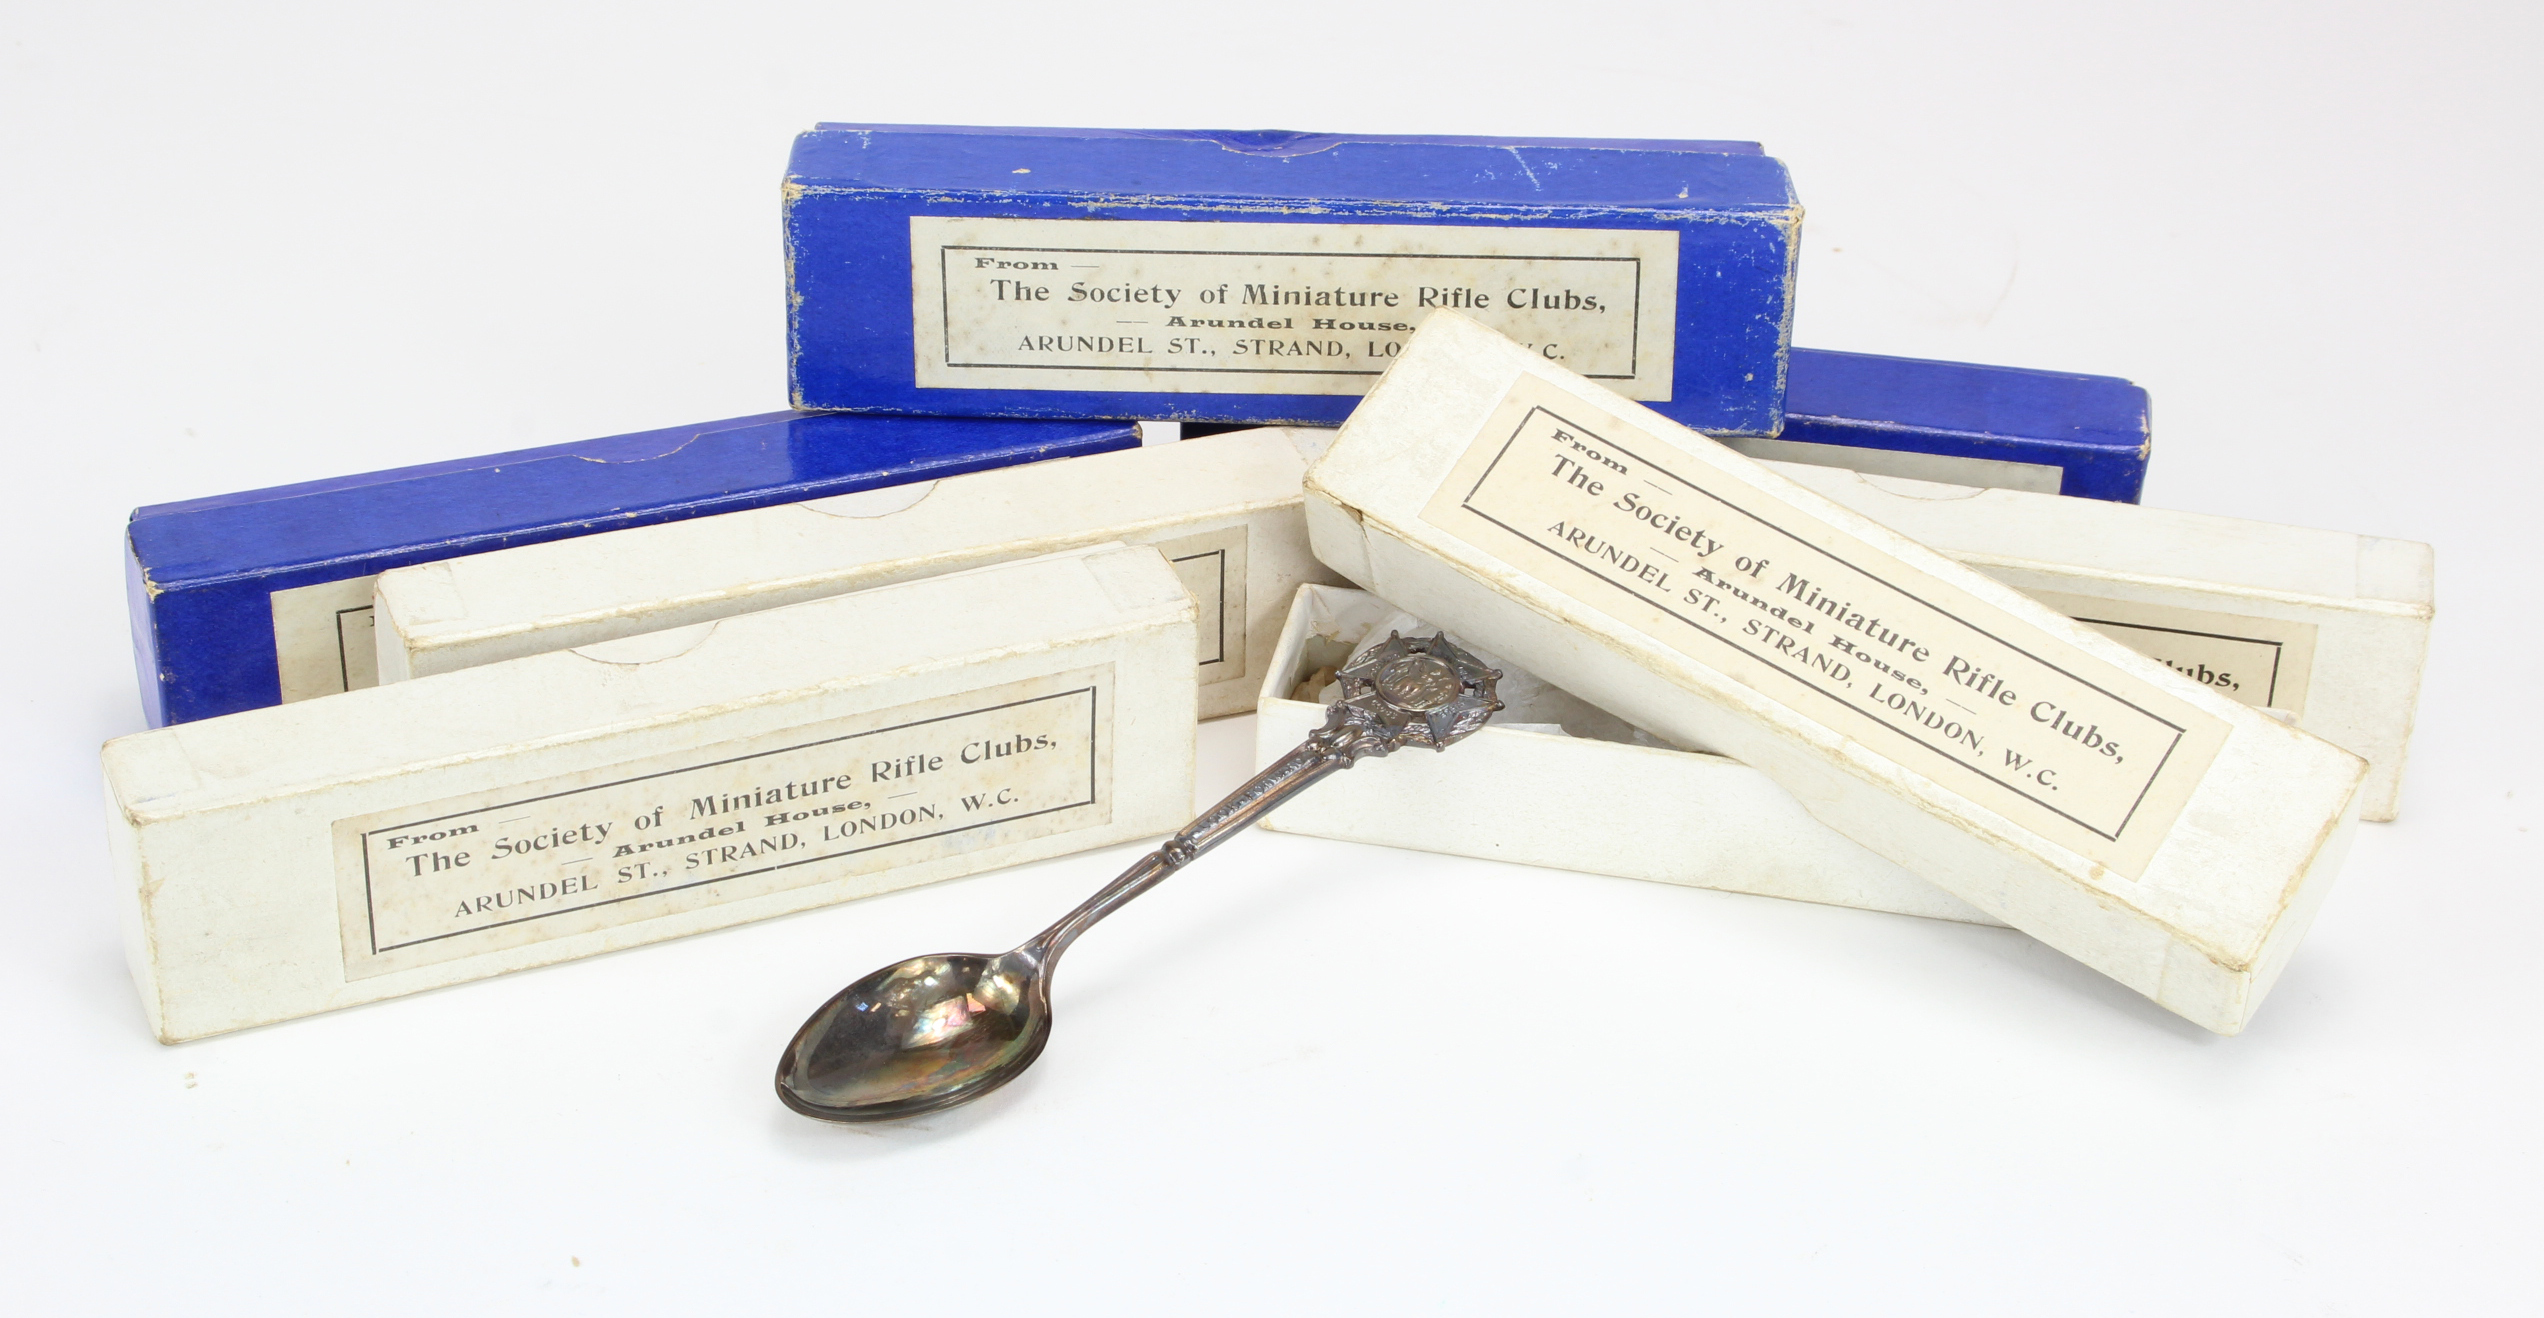 Miniature Rifle Club interest. Seven silver teaspoons relating to the Society of Miniature Rifle